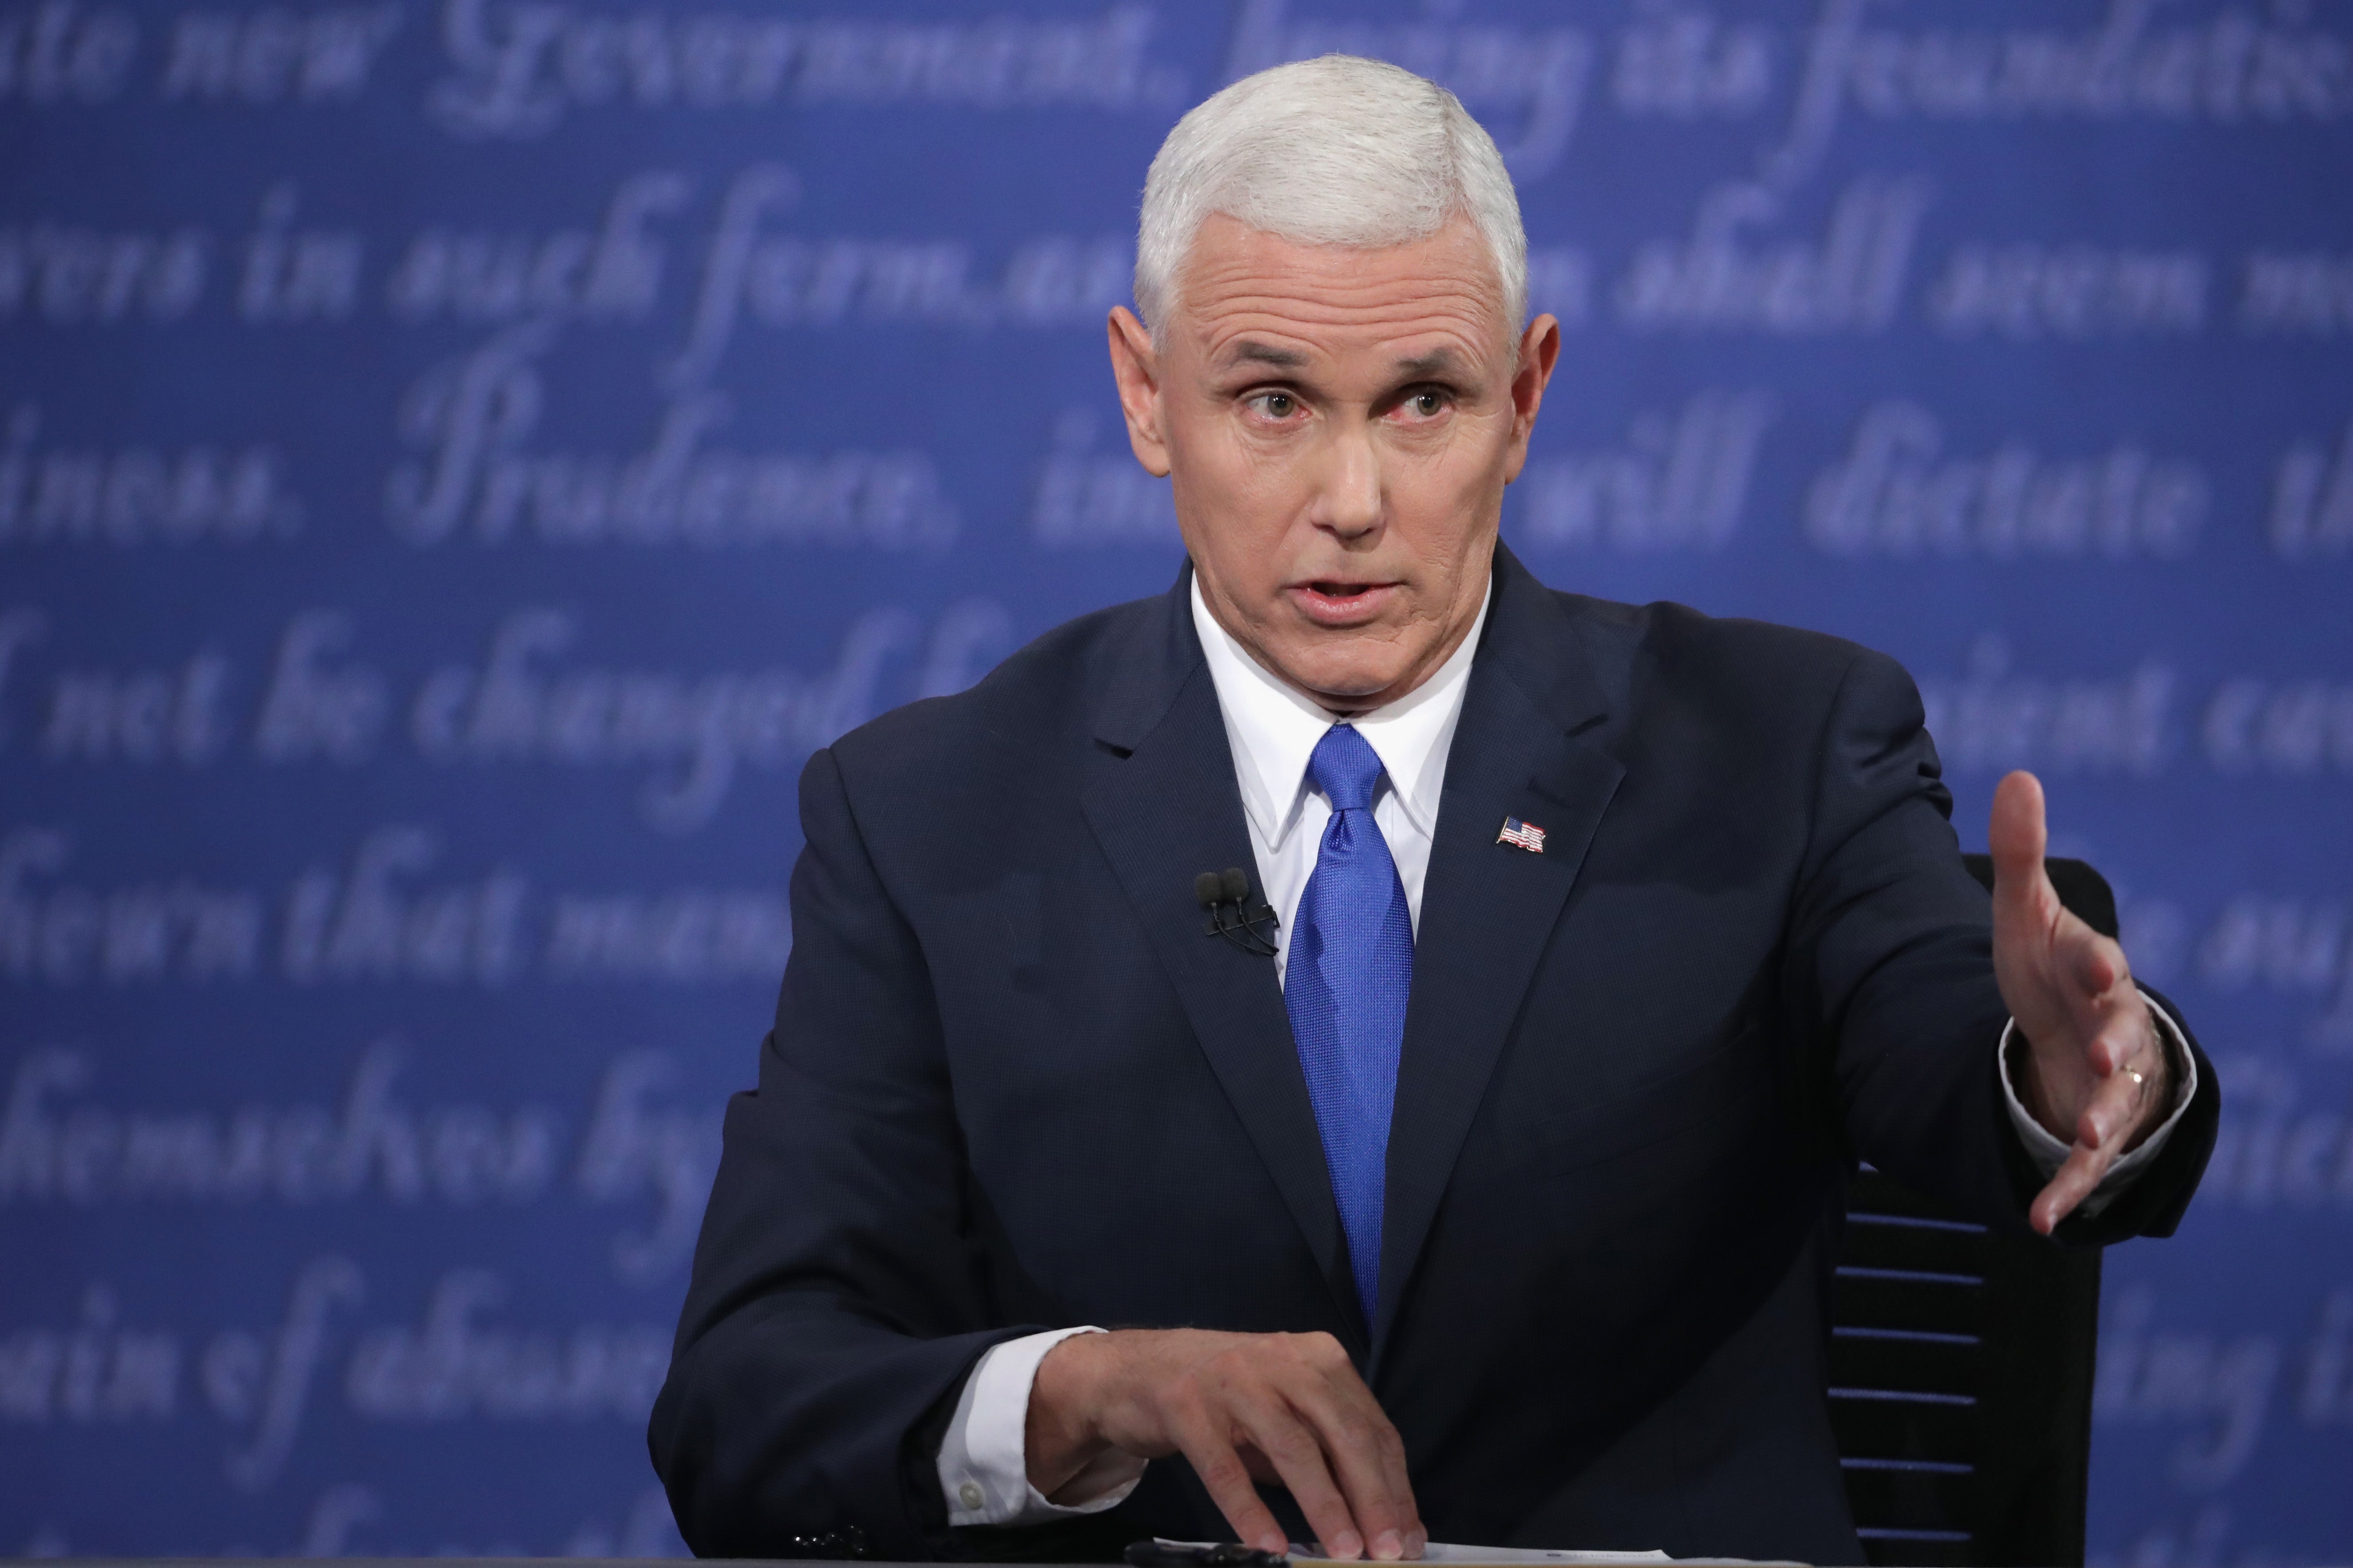 "That Mexican Thing?" Mike Pence Defends Trump's Disparaging Immigrant Comments During Debate
